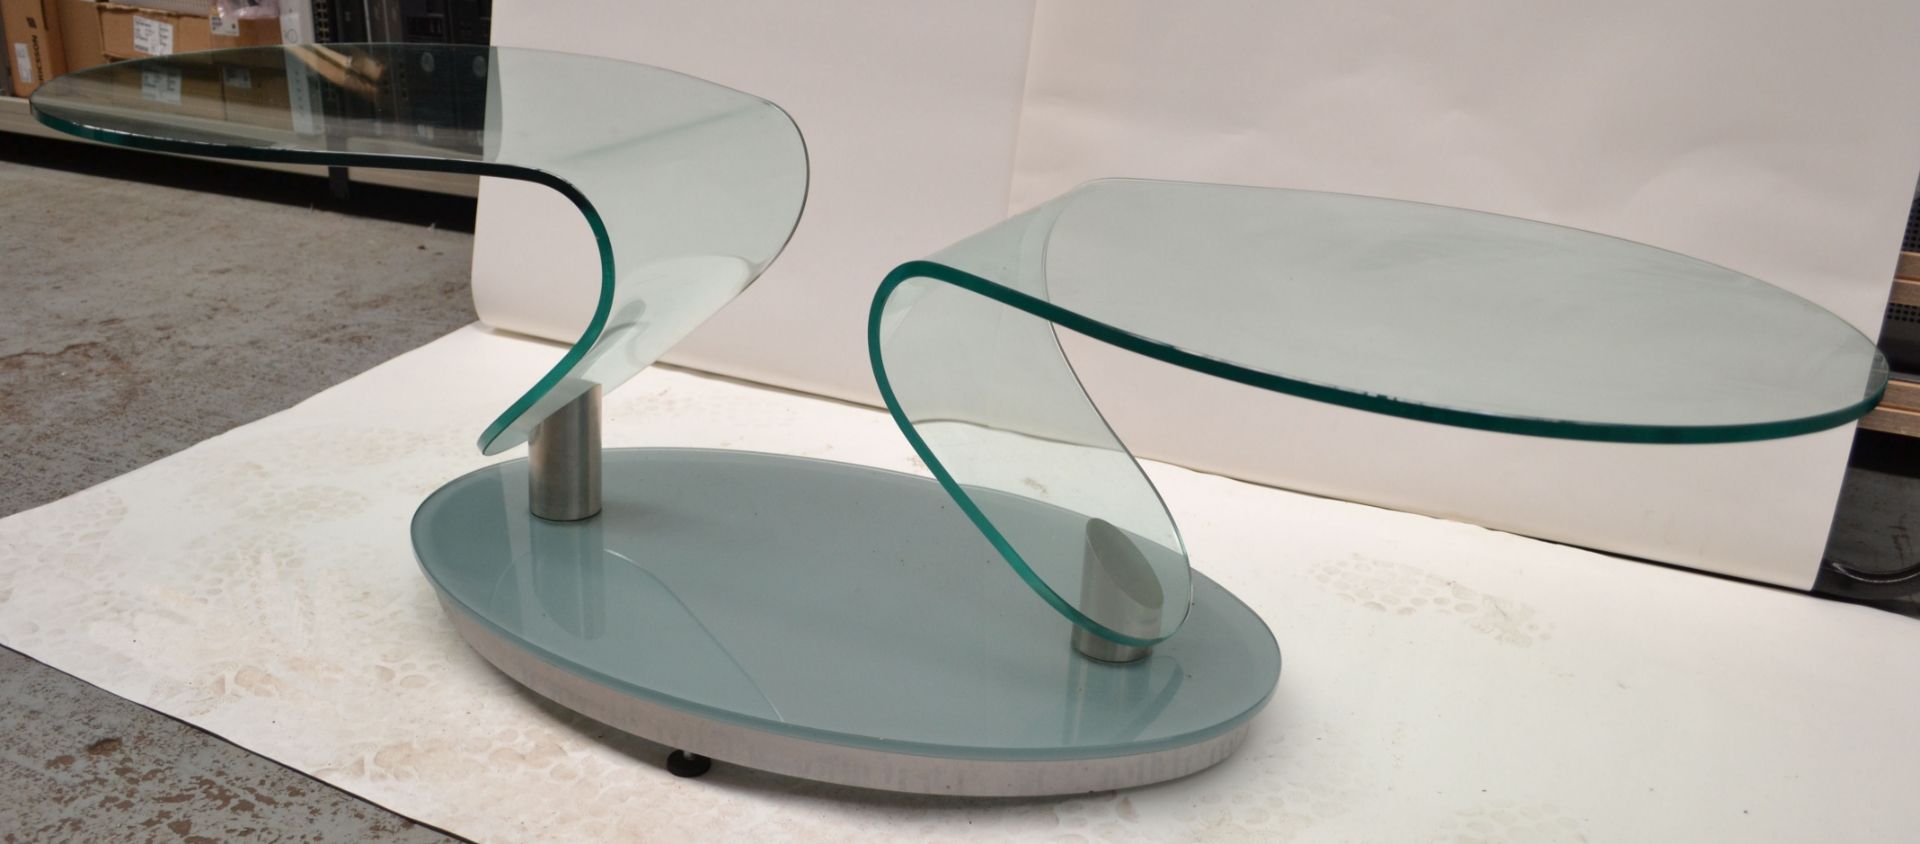 1 x Contemporary Swivelling Glass Coffee Table - AE007 - CL007 - Location: Altrincham WA14 - NO VAT - Image 10 of 10